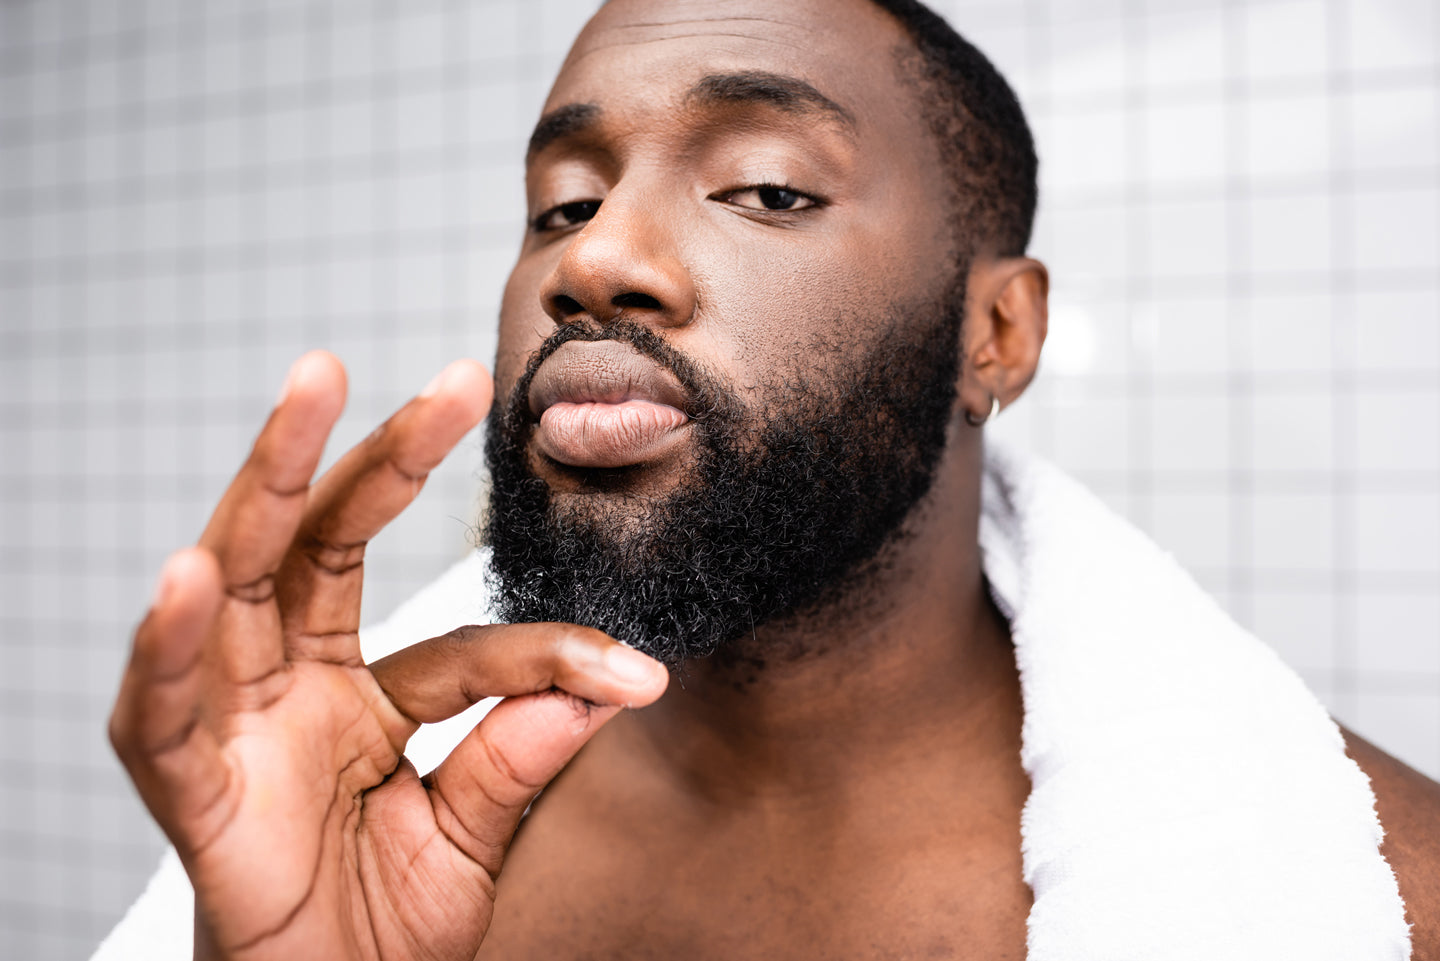 Beard Stop Growing? Here Are Some Reasons Why